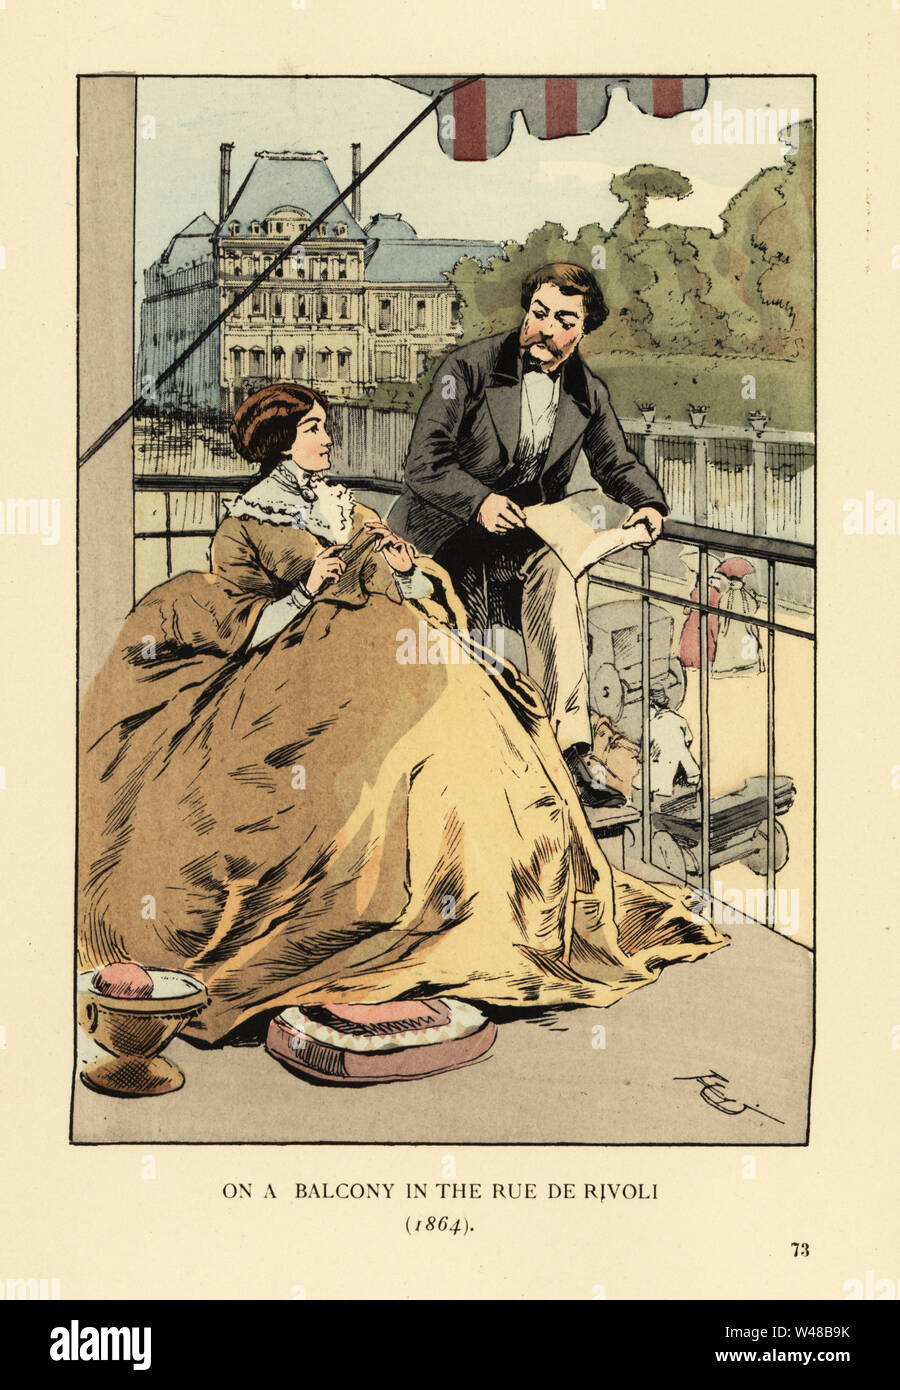 On a balcony in the rue de Rivoli, Paris, 1864. Woman with mustard crinoline dress with pelerine. The Louvre and Jardin des Tuileries across the street. Handcoloured lithograph by R.V. after an illustration by Francois Courboin from Octave Uzanne’s Fashion in Paris, William Heinemann, London, 1898. Stock Photo